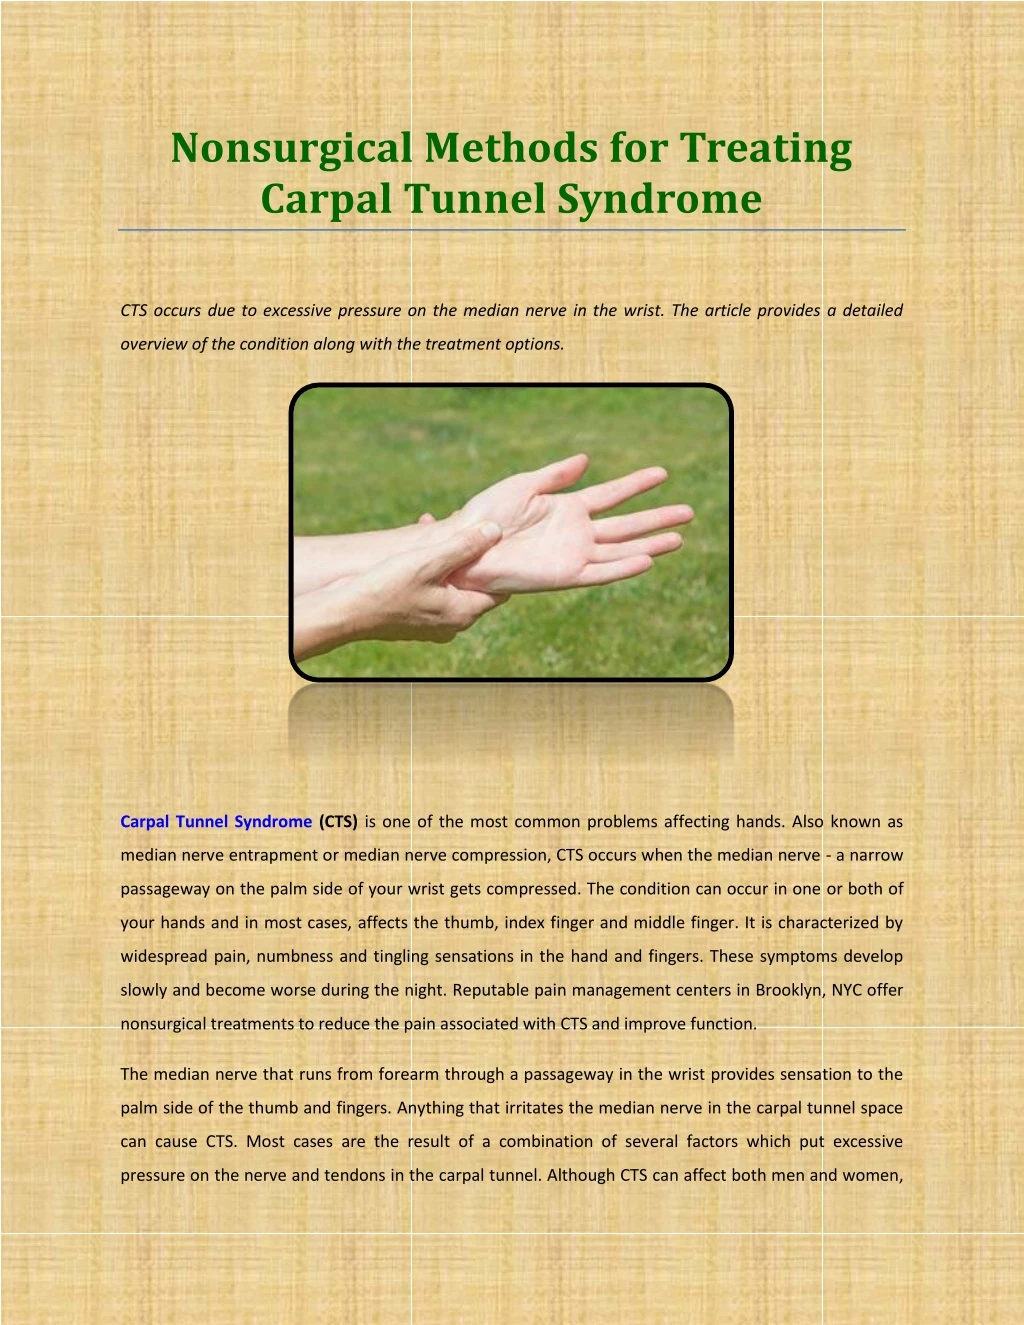 nonsurgical methods for treating carpal tunnel